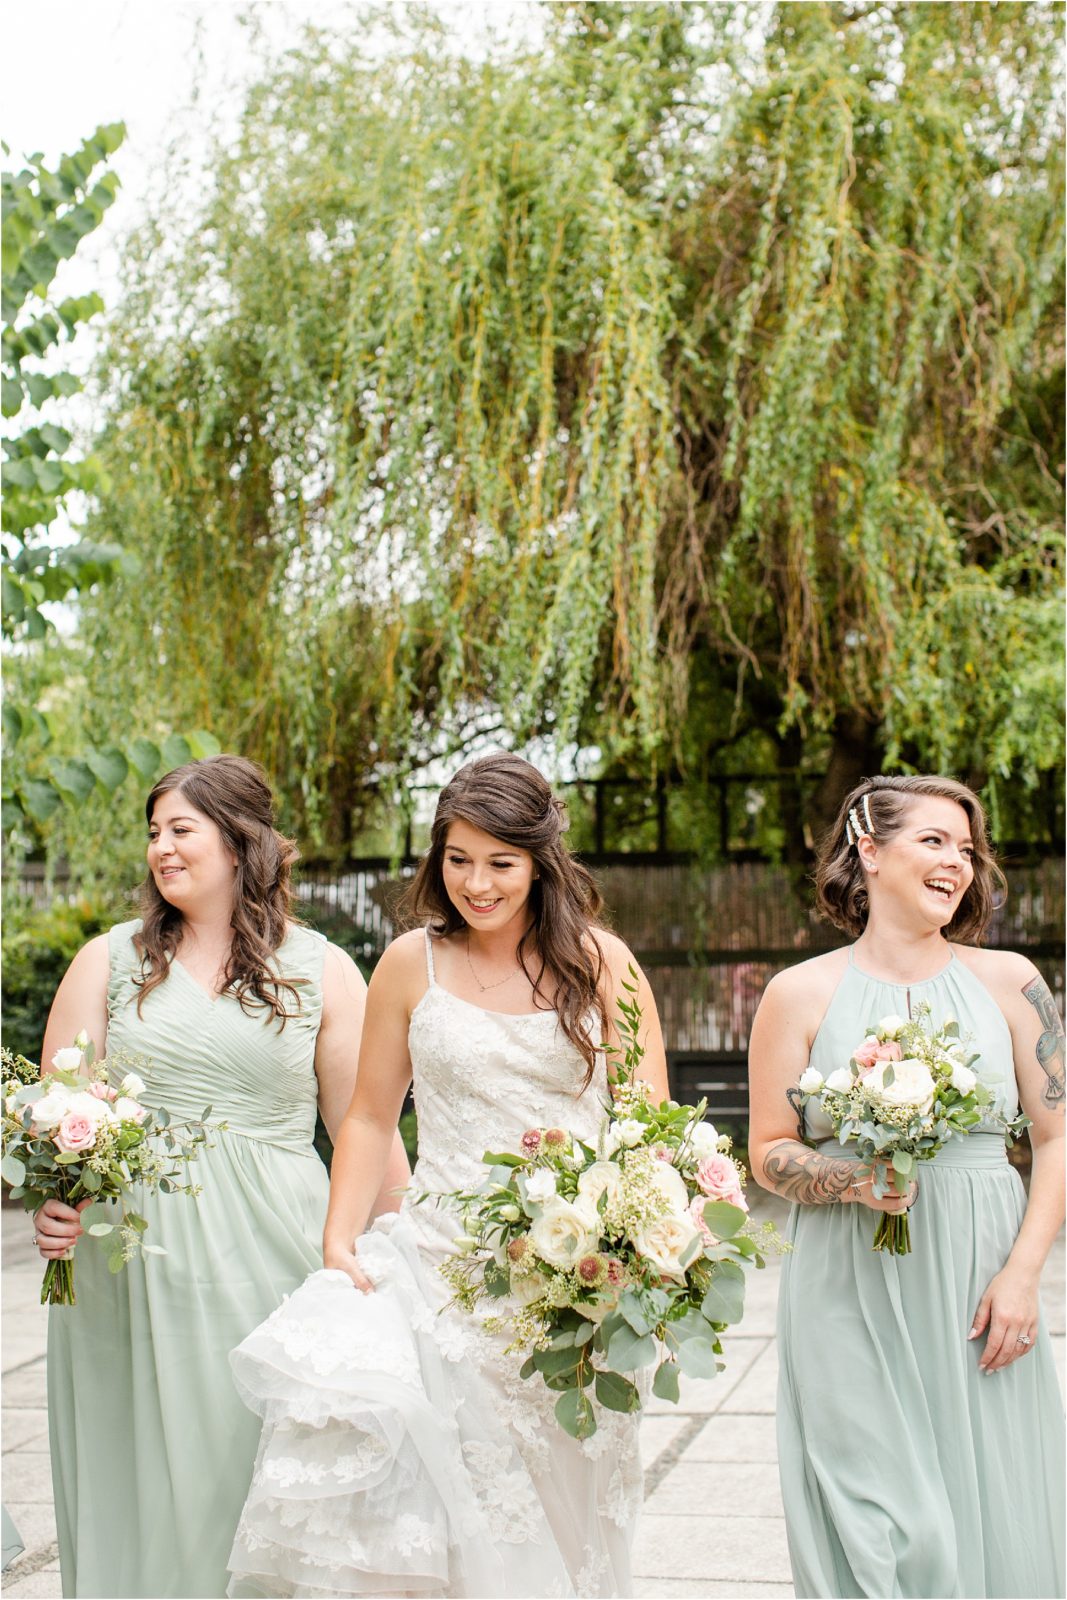 Women in wedding clothes walk with flowers